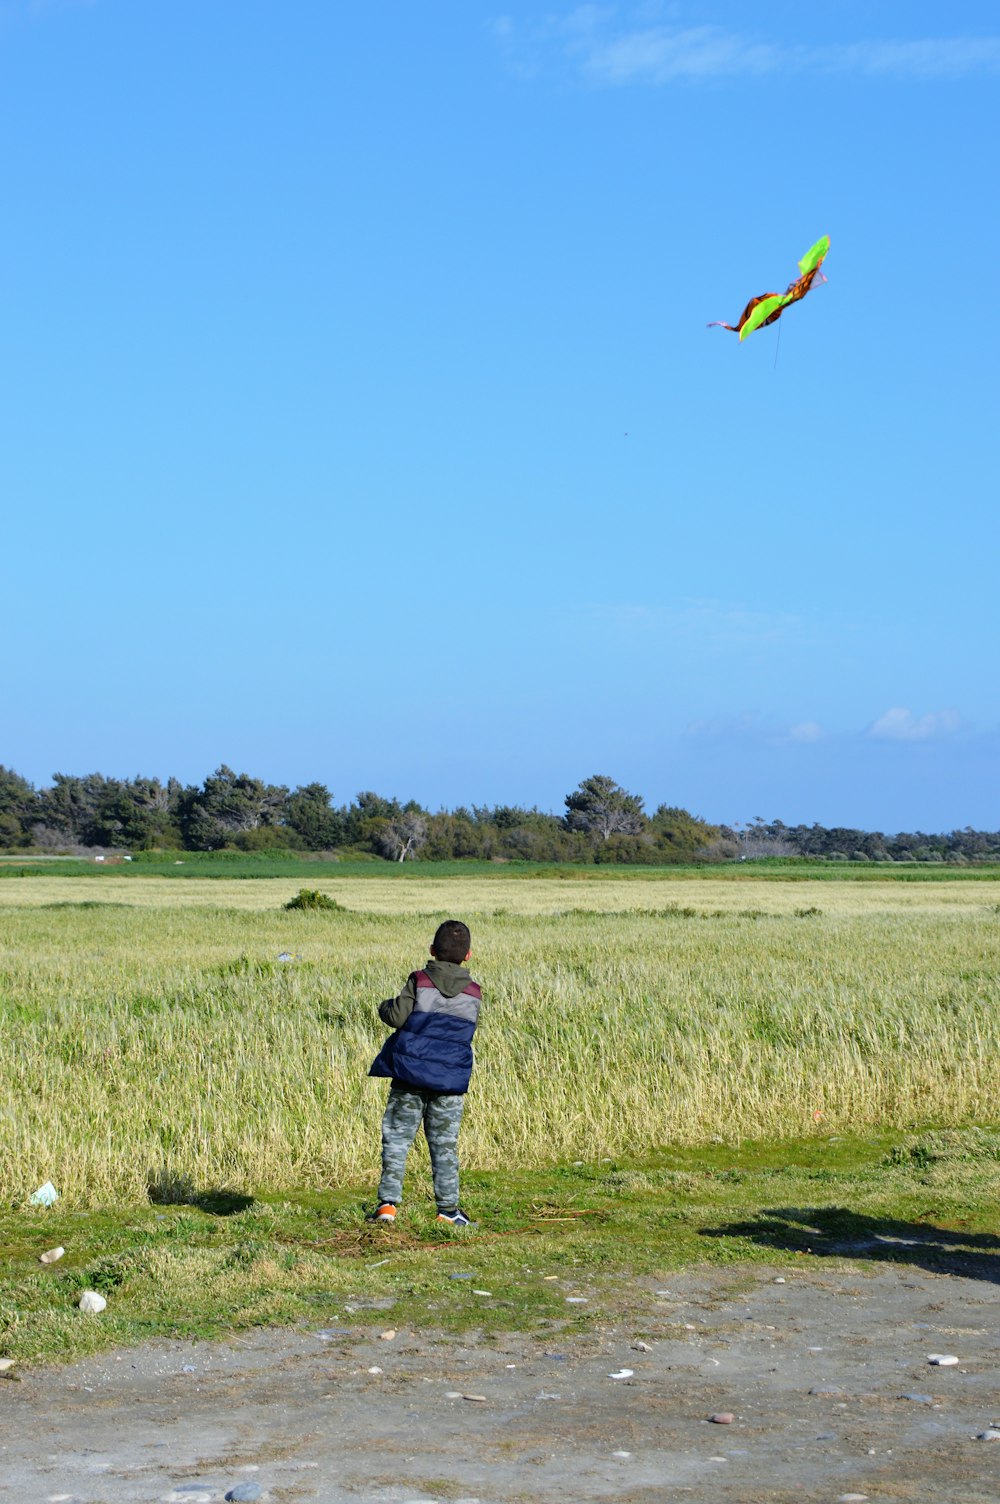 a person standing in a field flying a kite